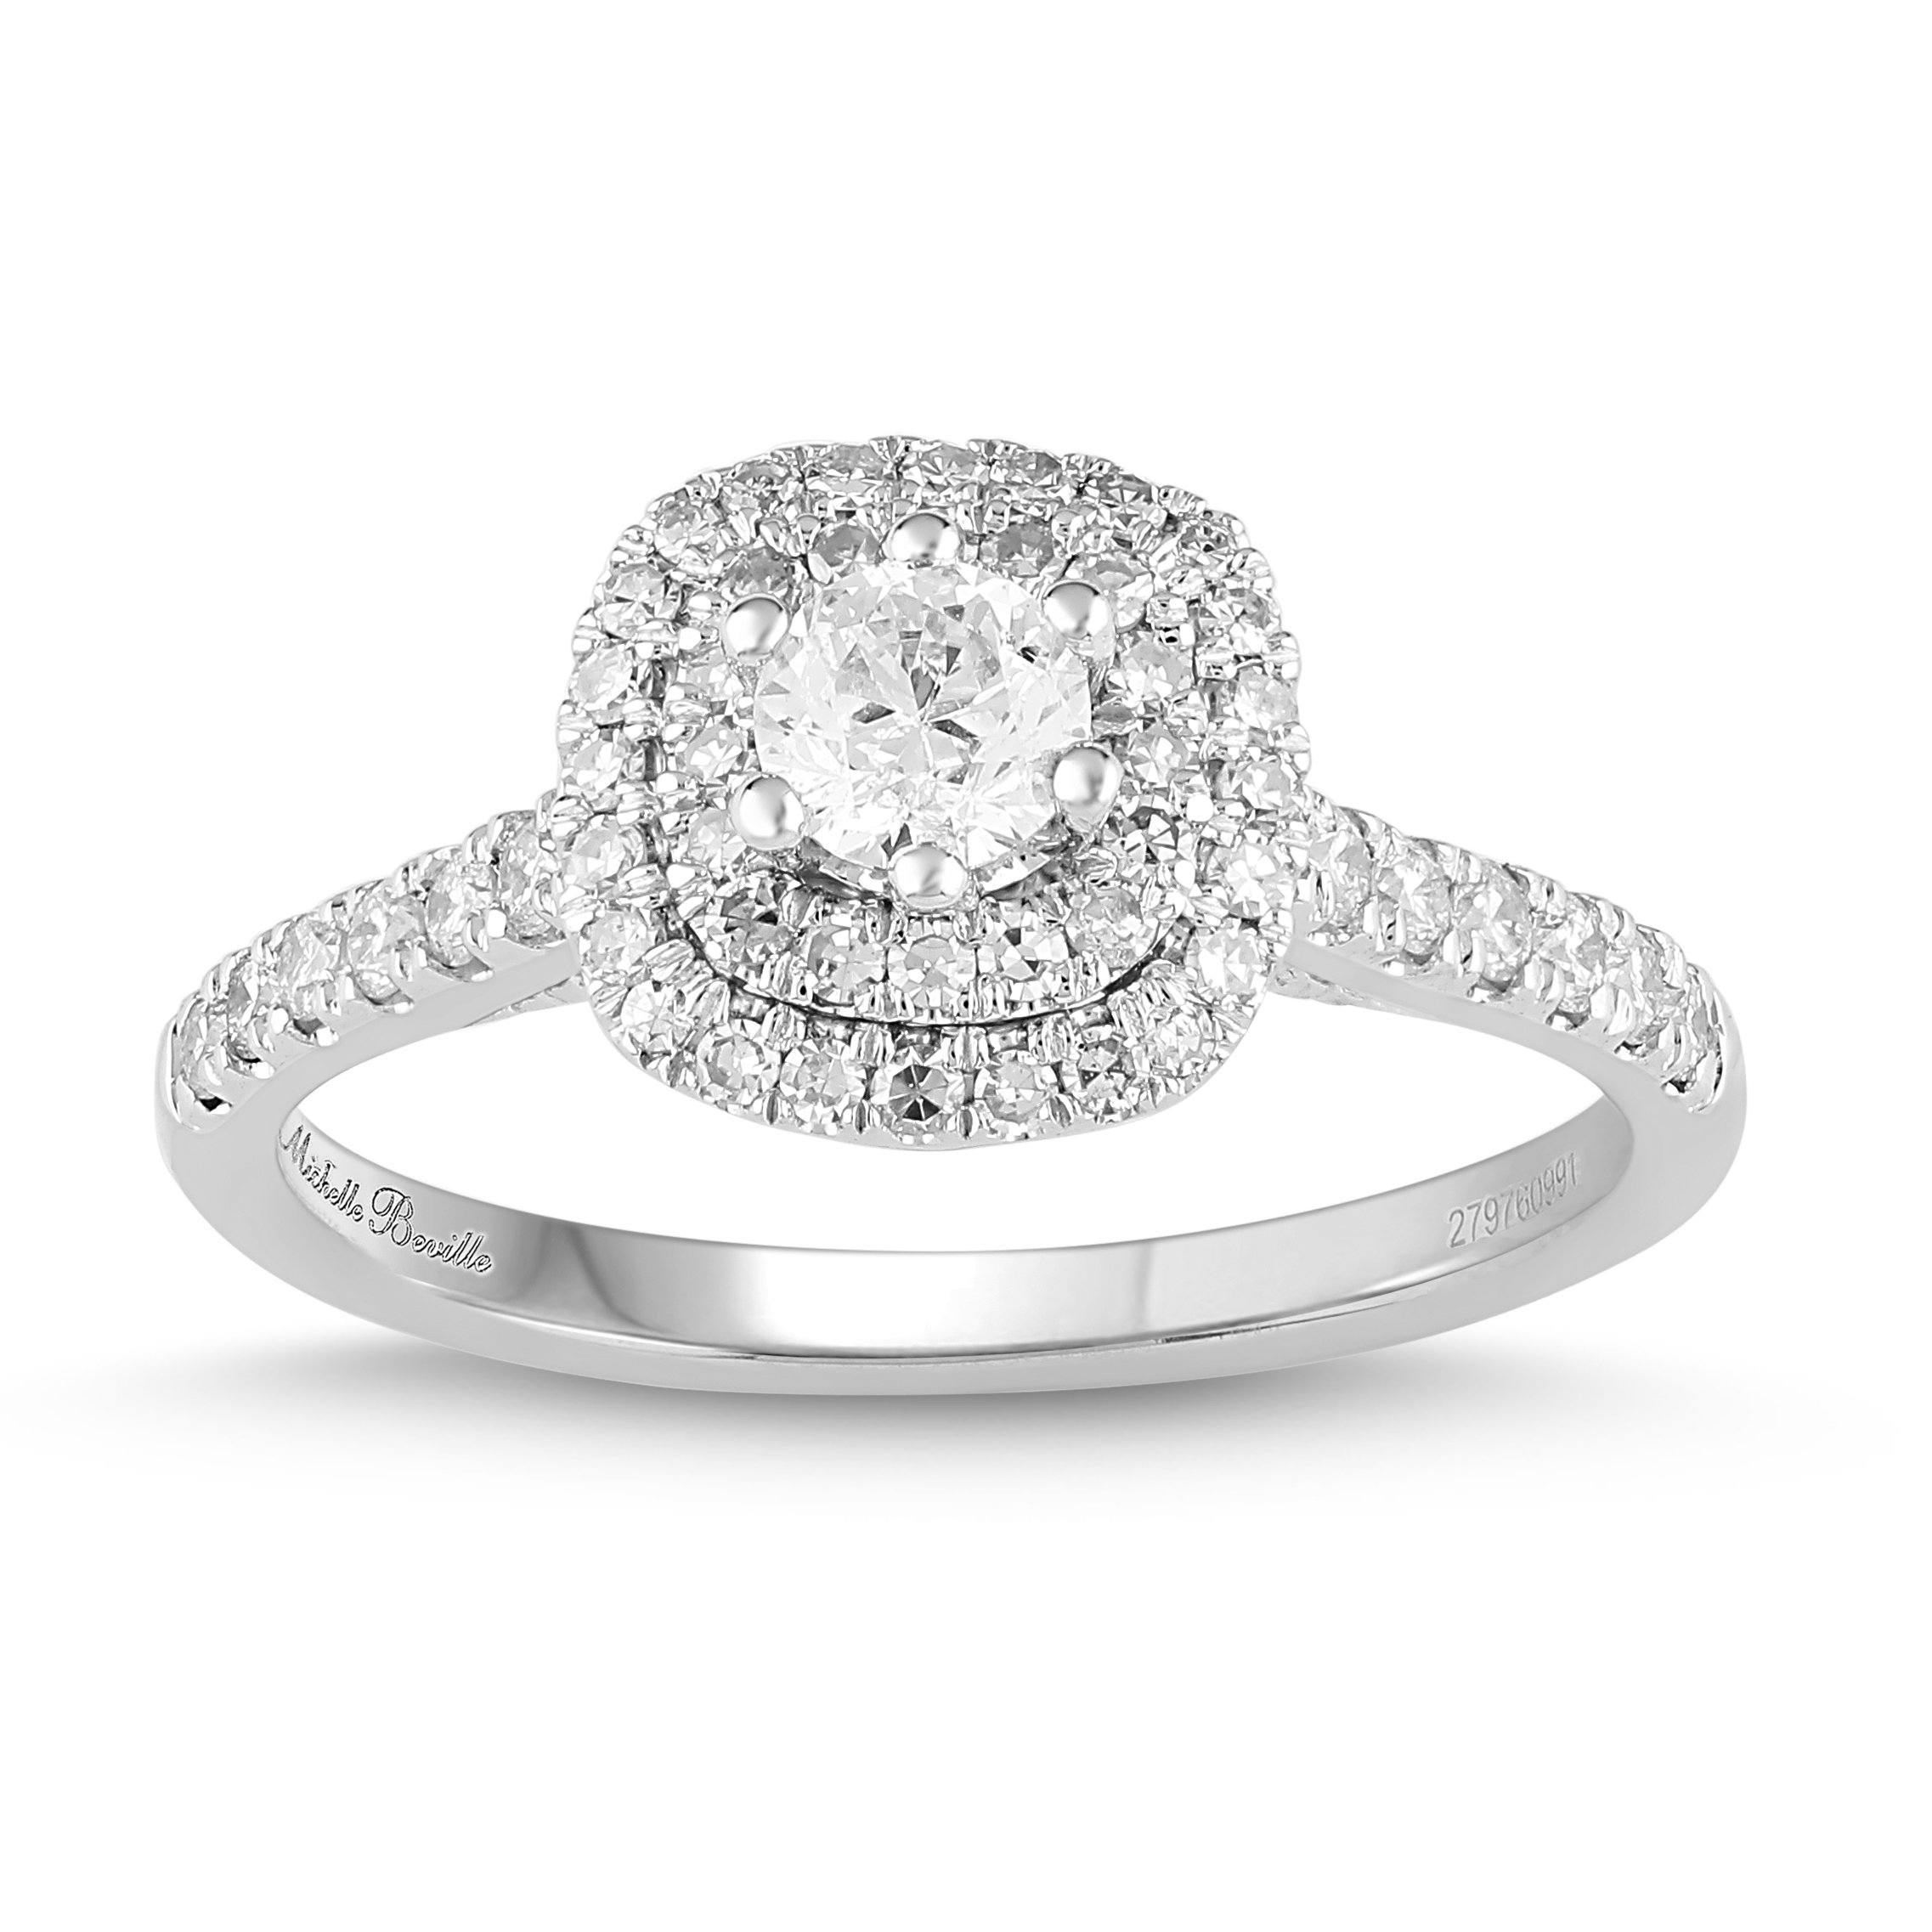 Love by Michelle Beville Halo Solitaire Ring with 0.70ct of Diamonds in 18ct White Gold Rings Bevilles 